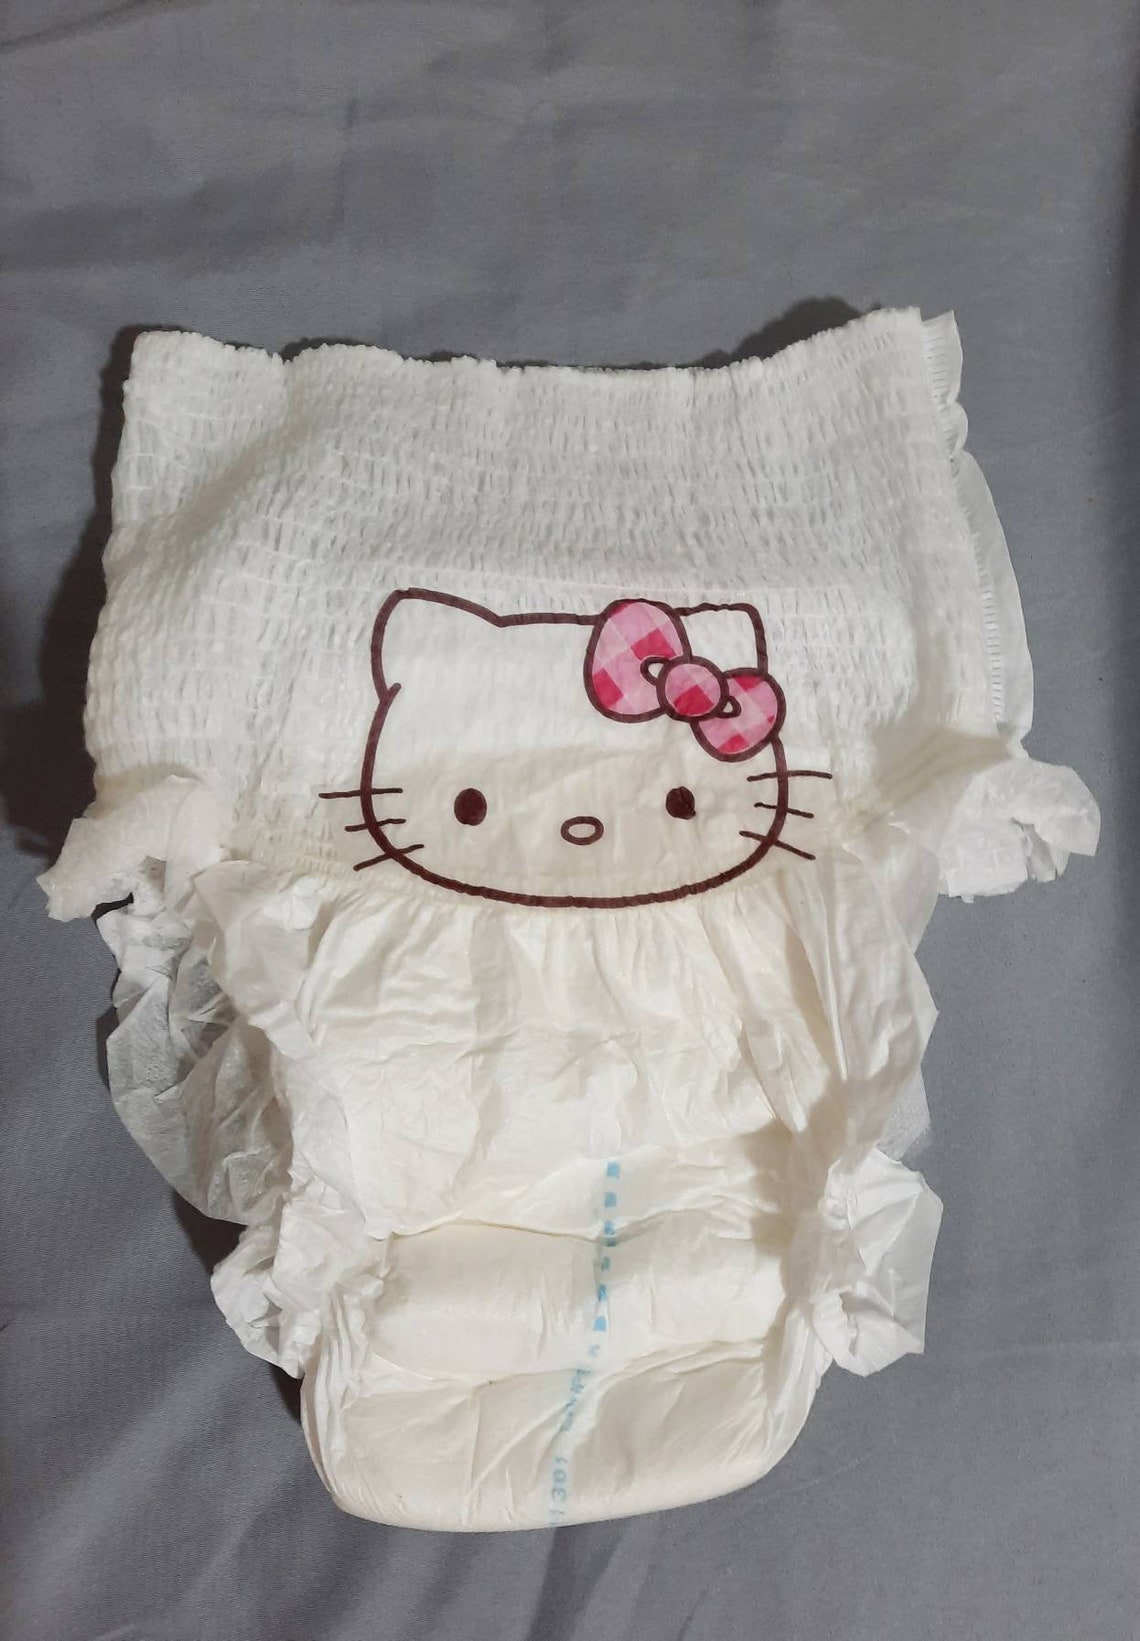 Size M Three Conped Adult Pull Ups Diapers Abdl Original Etsy